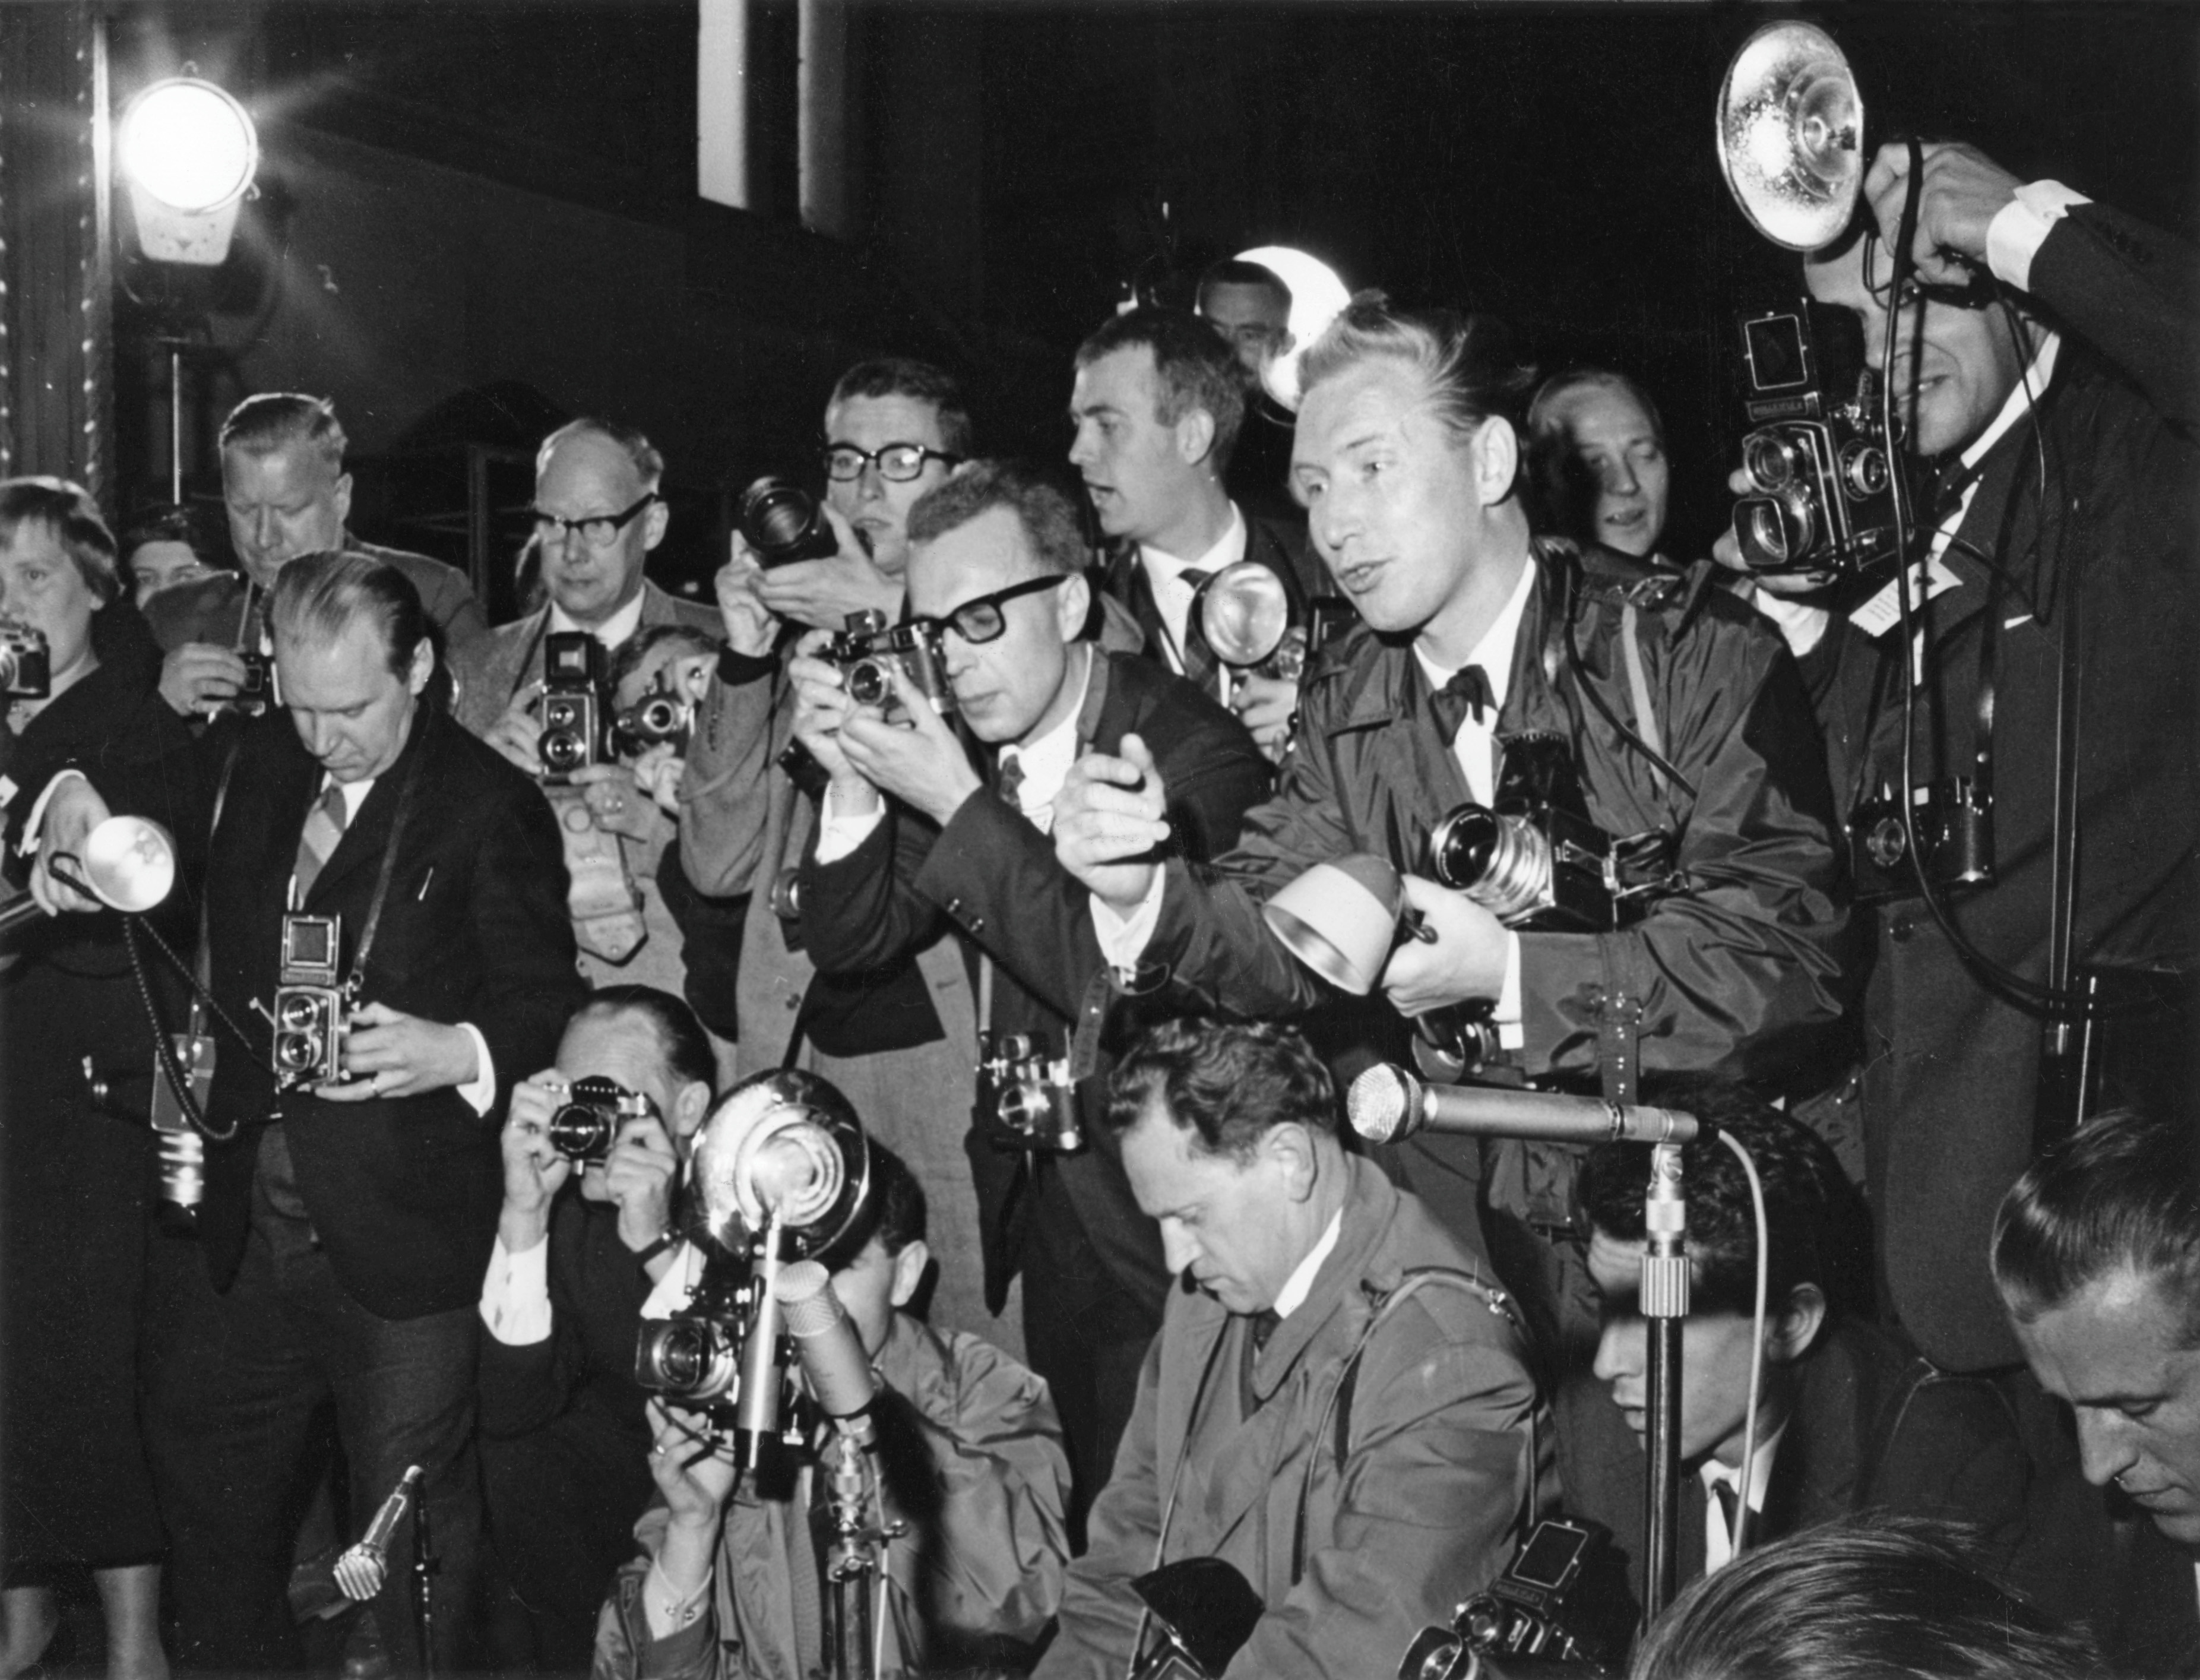 Black and white photo with a crowd of journalists dressed in suits crowding with their flashes and cameras at a press conference..